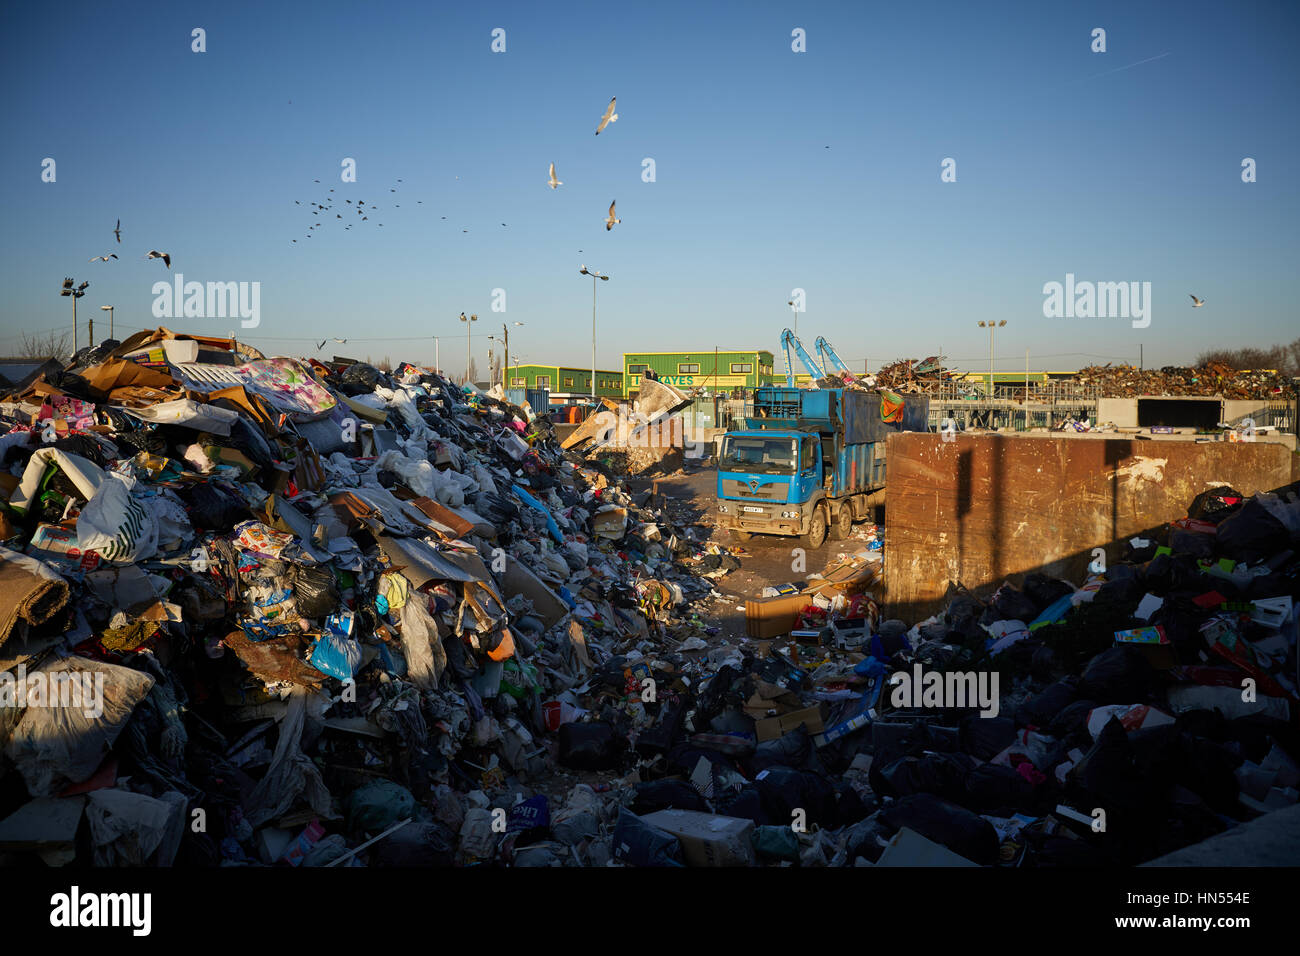 A large pile of rubbish mound at Mount Road Council run Landfill tip recycling dump in Gorton, Manchester, England, UK    Landfill council recycle cen Stock Photo